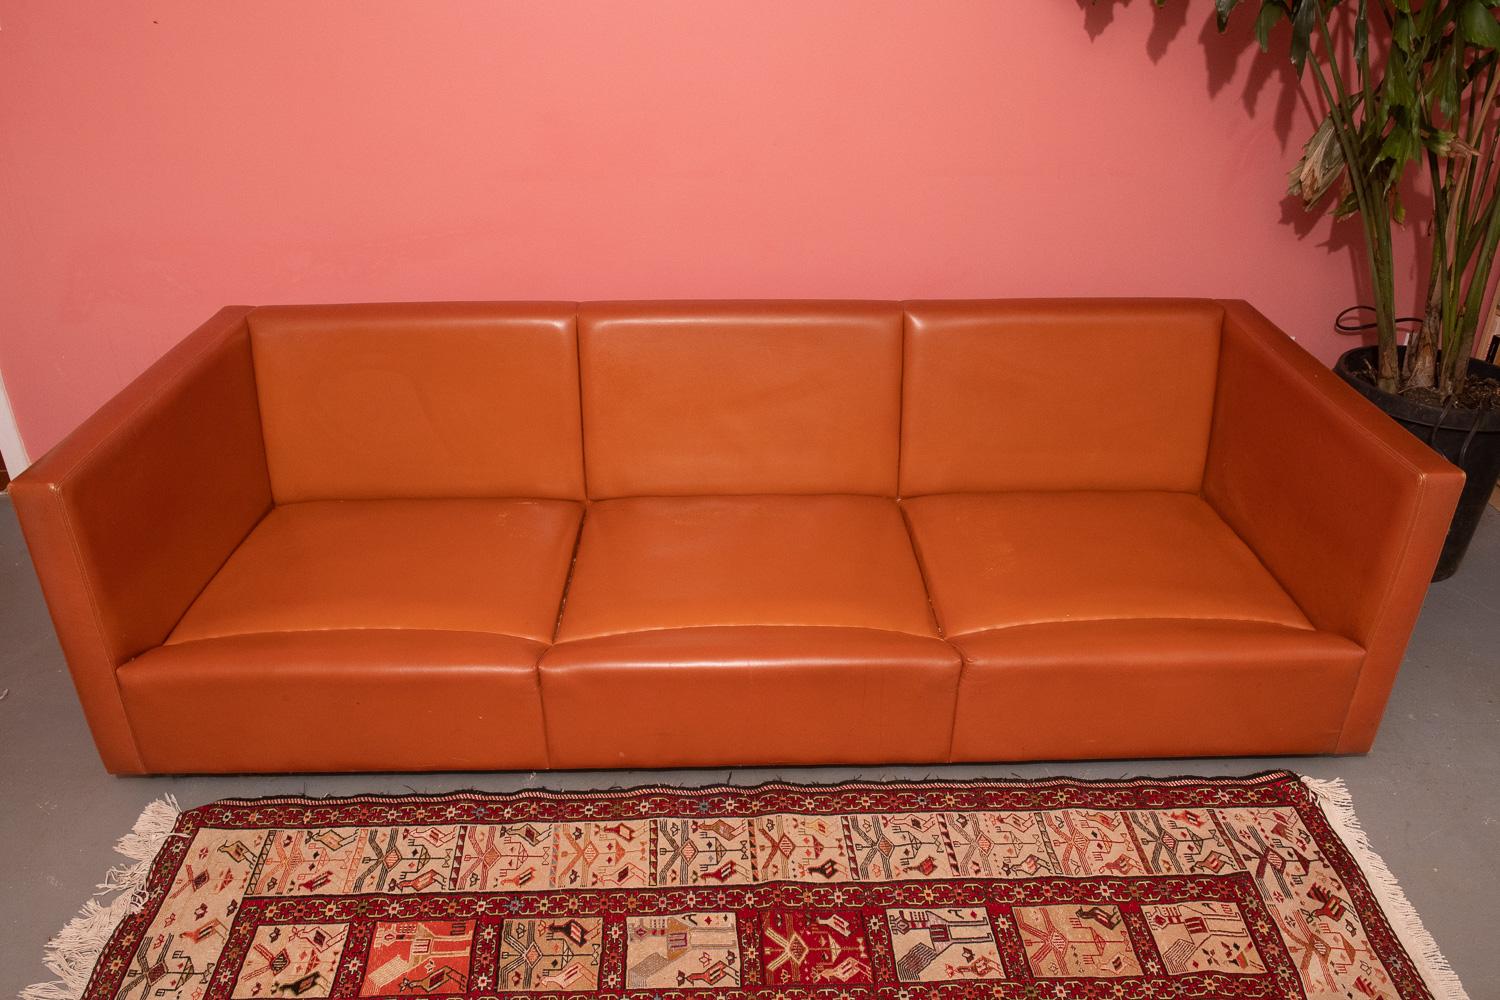 Knoll Sofa by Charles Pfister 1971 Original Sabrina Leather, #1, '2 Available' For Sale 1